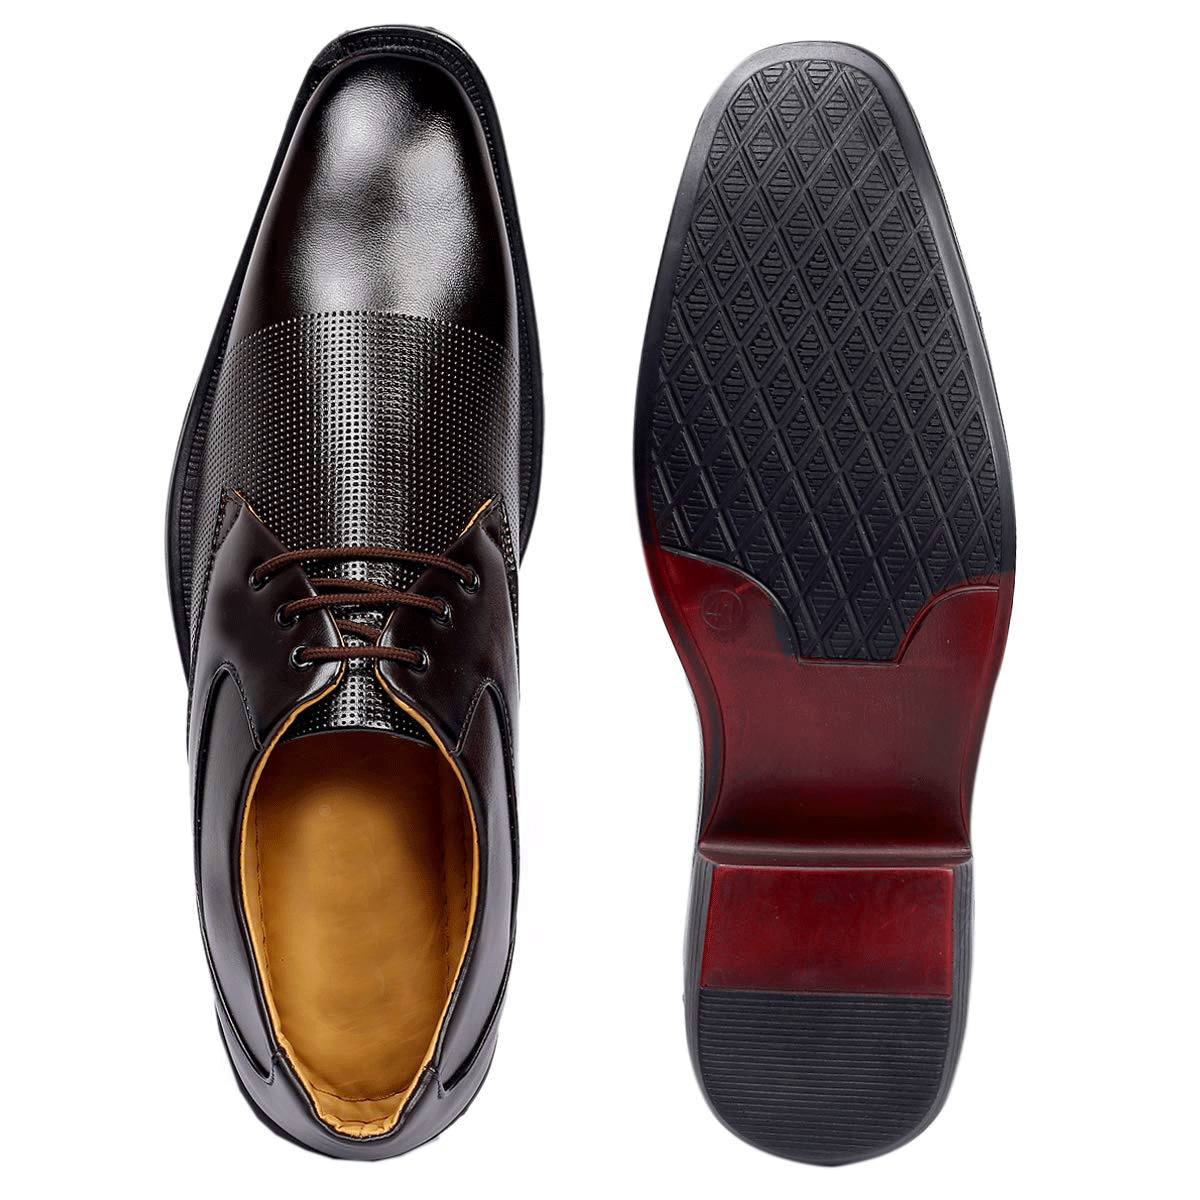 Classy Brown Oxford Formal, Casual And Outdoor Shoes With High Heel-Unique and Classy